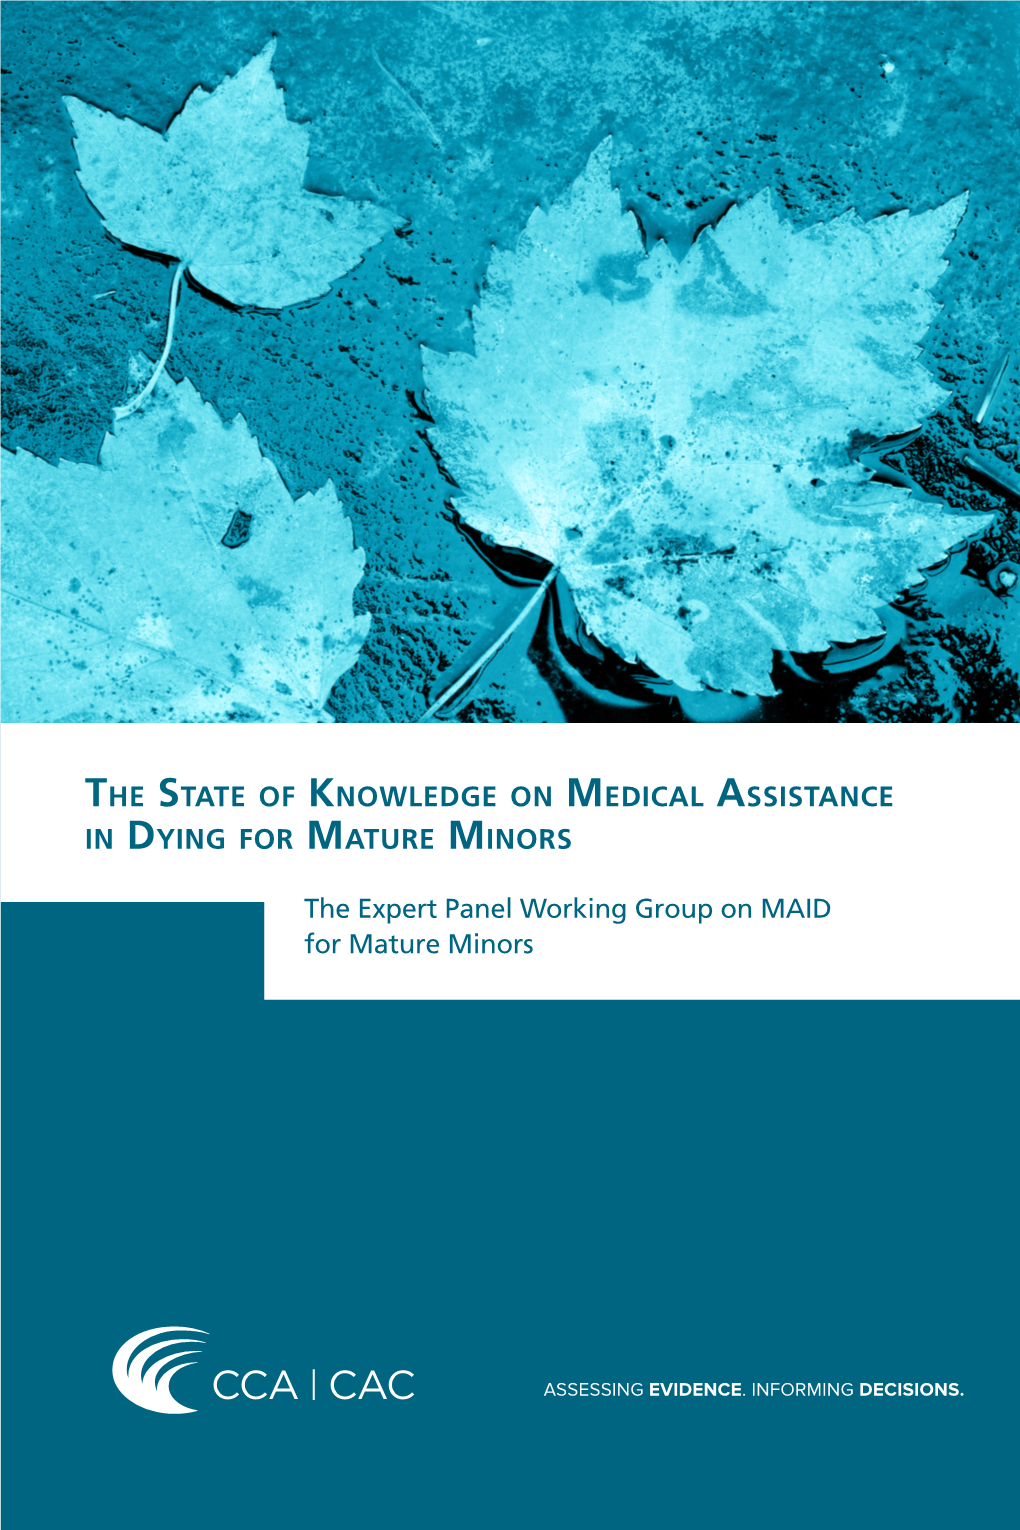 The State of Knowledge on Medical Assistance in Dying for Mature Minors